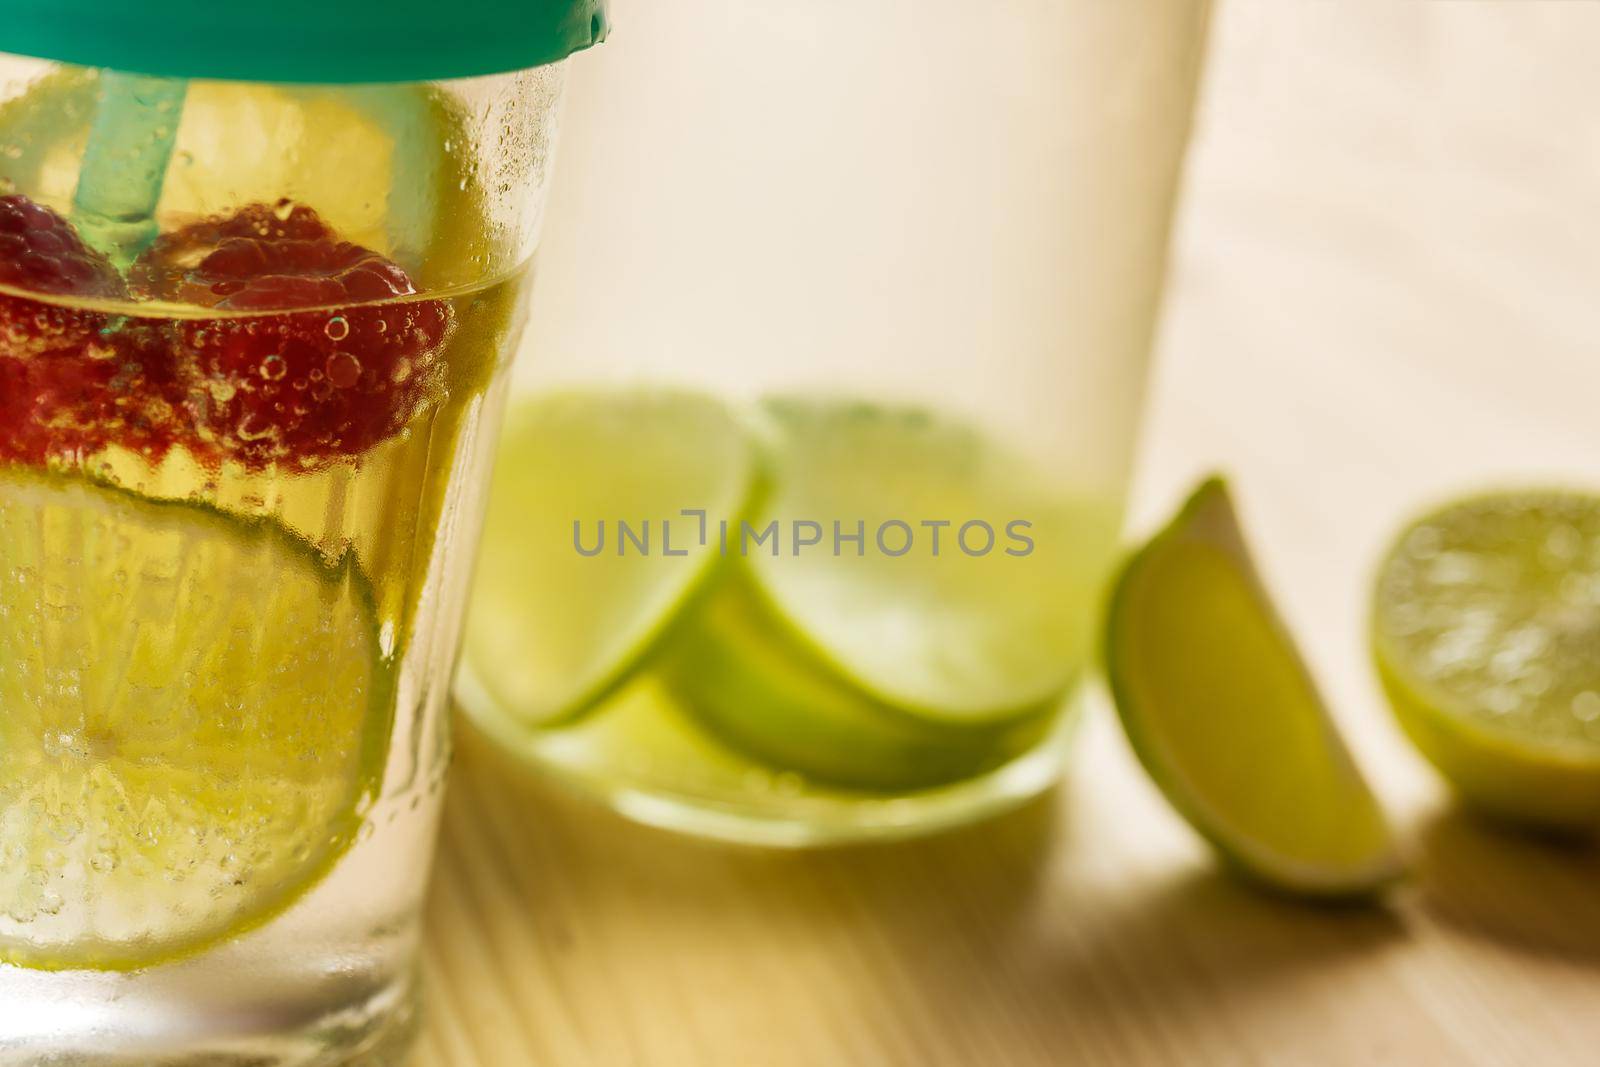 bottle and glass with cold water and slices of lime, lemon and red berries, illuminated by sunlight on a wooden table with some pieces of citrus, citrus summer refreshments background, copy space